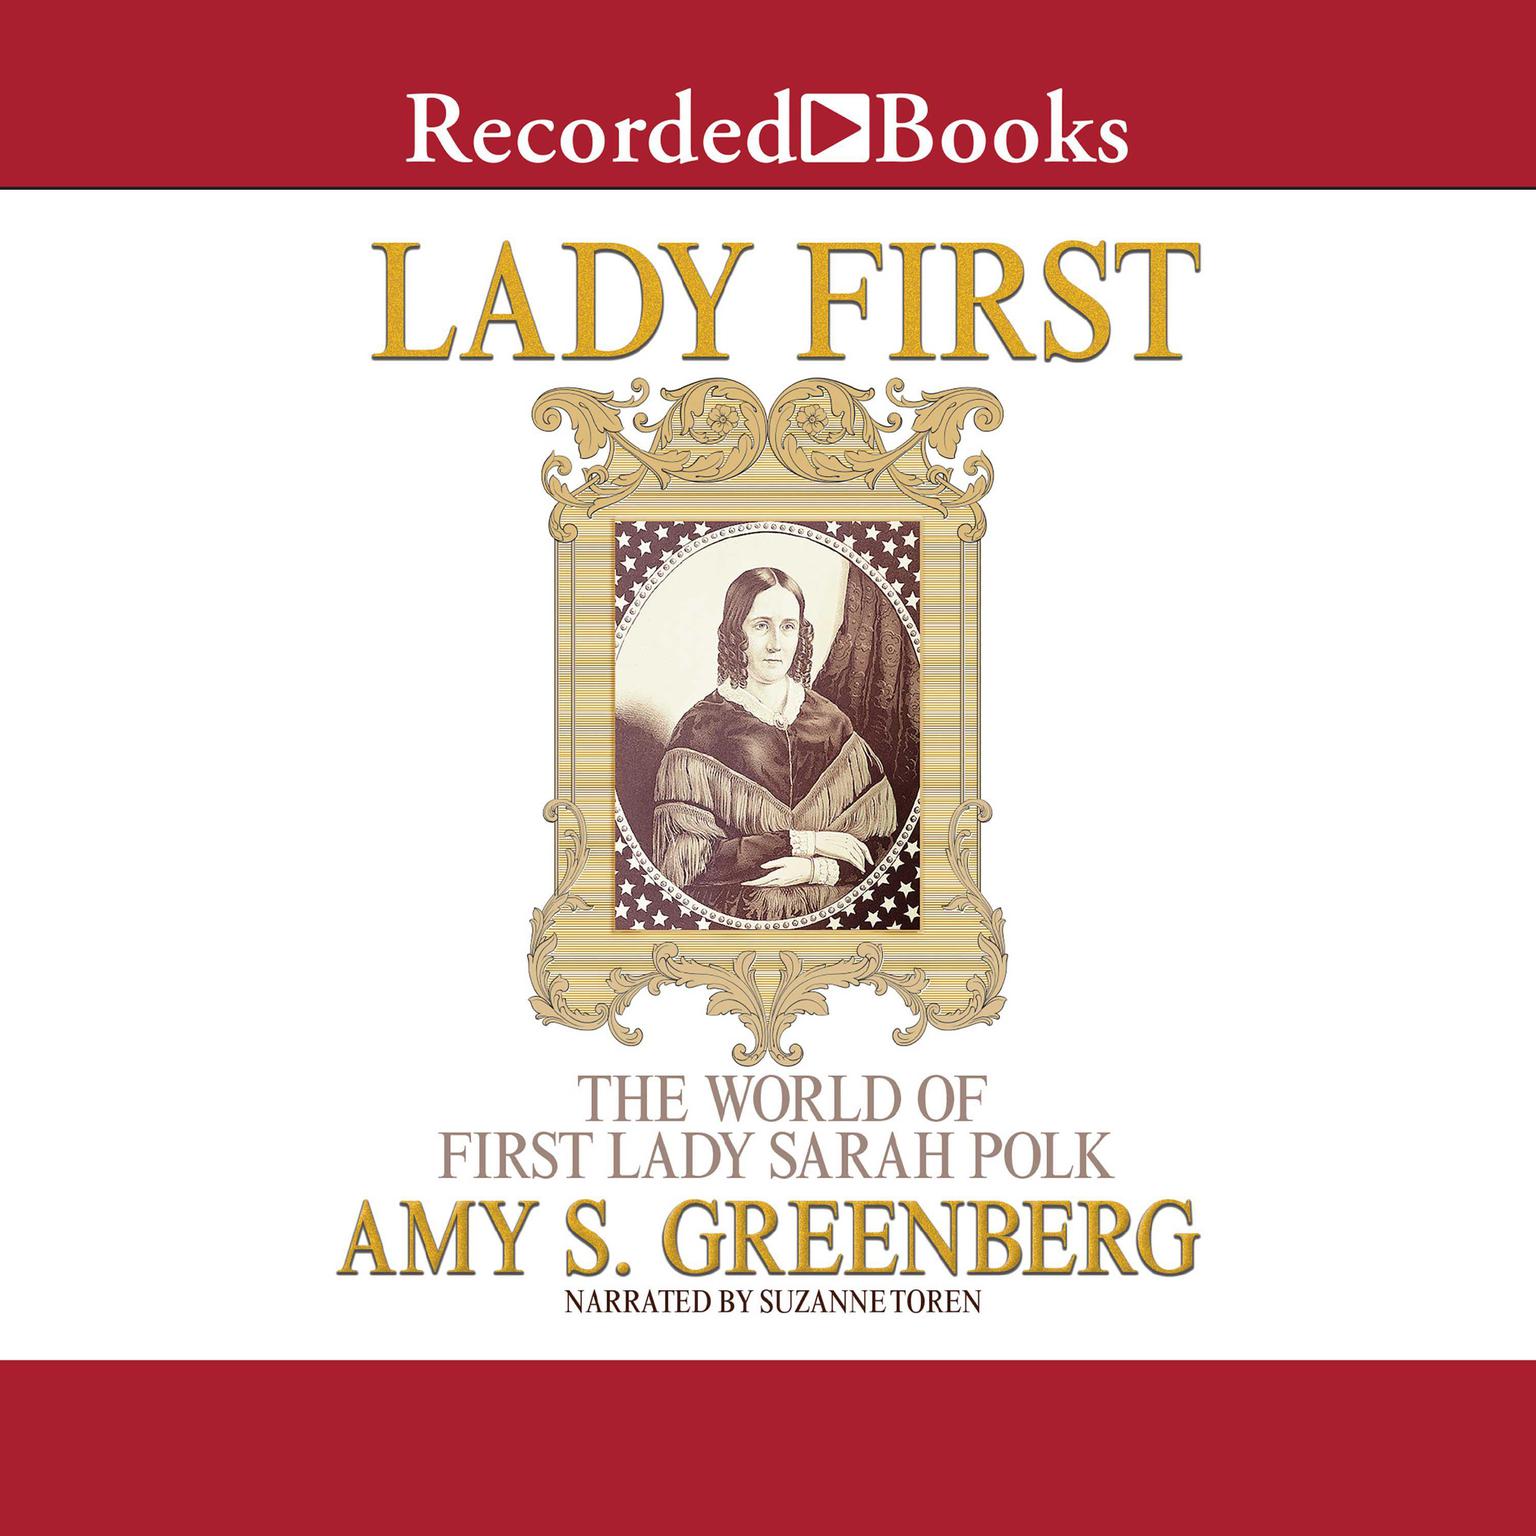 Lady First: The World of First Lady Sarah Polk Audiobook, by Amy S. Greenberg